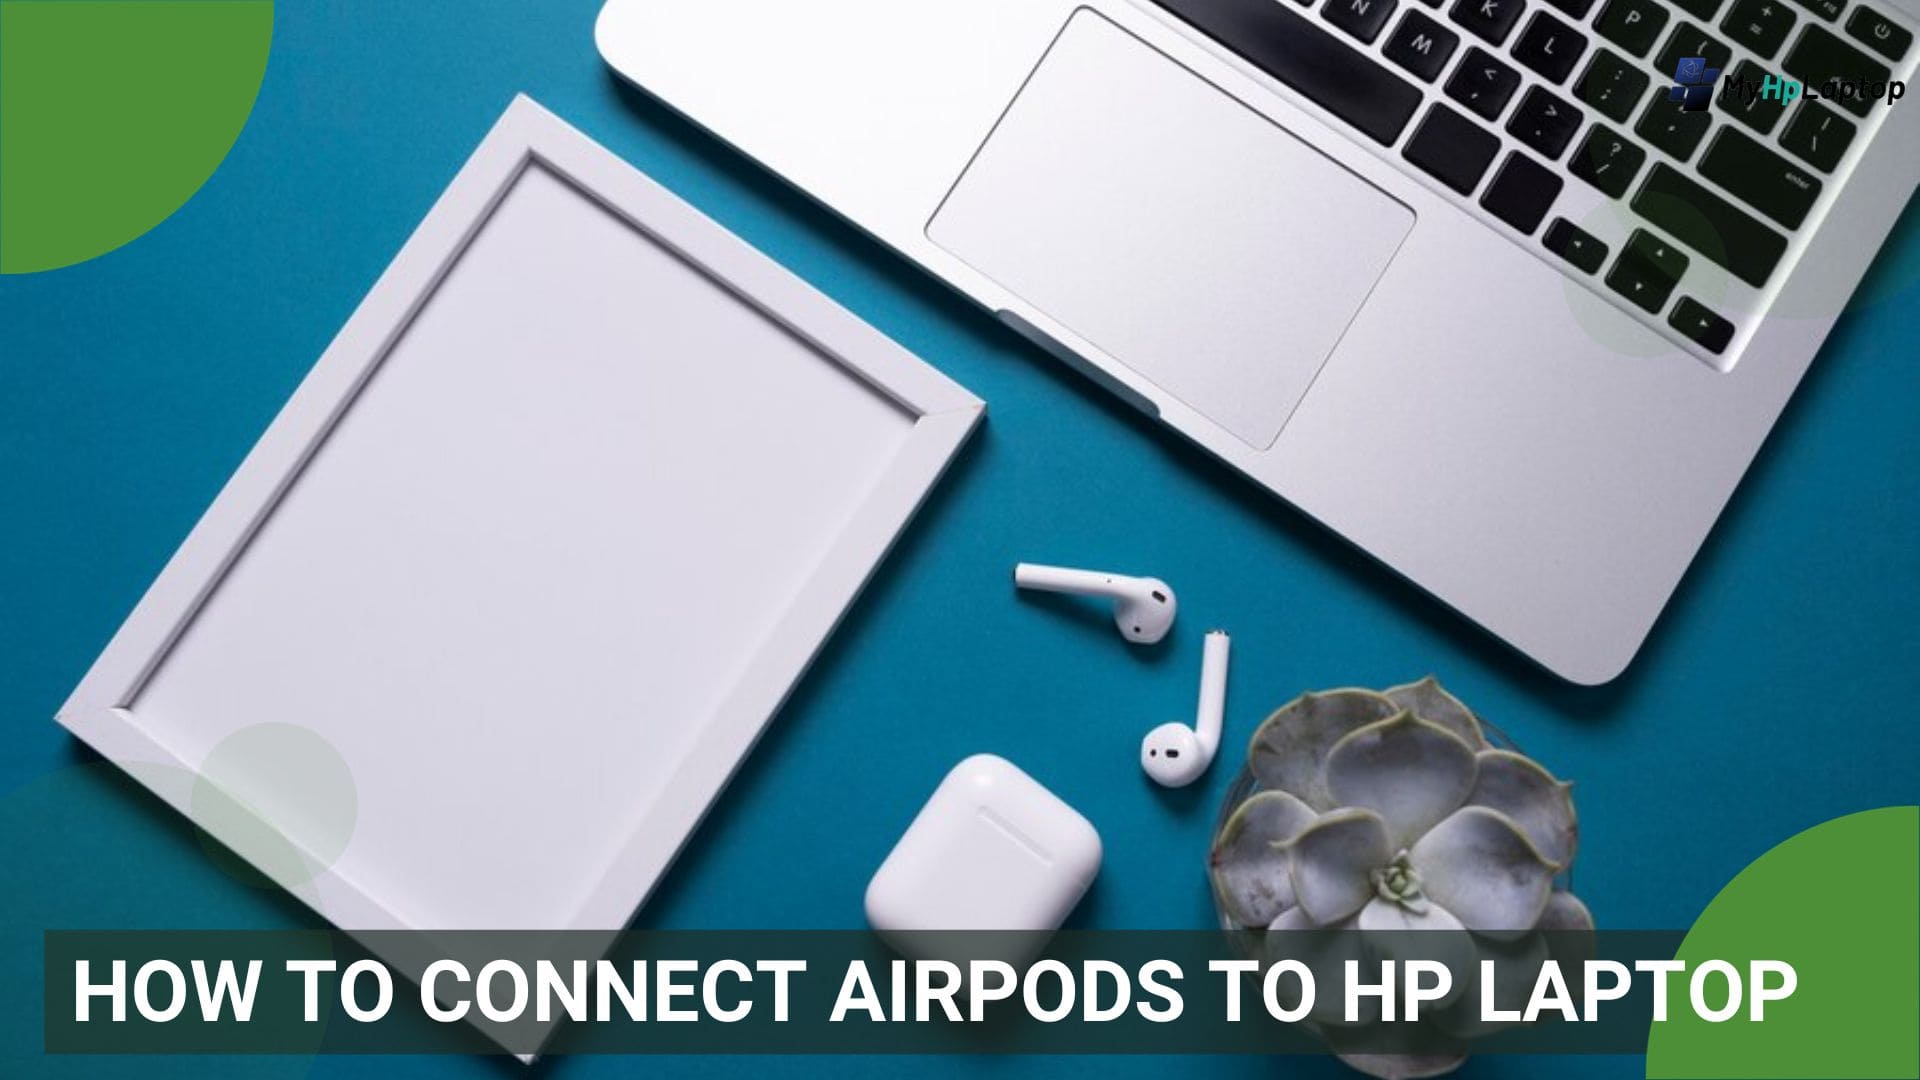 How to Connect AirPods to HP Laptop